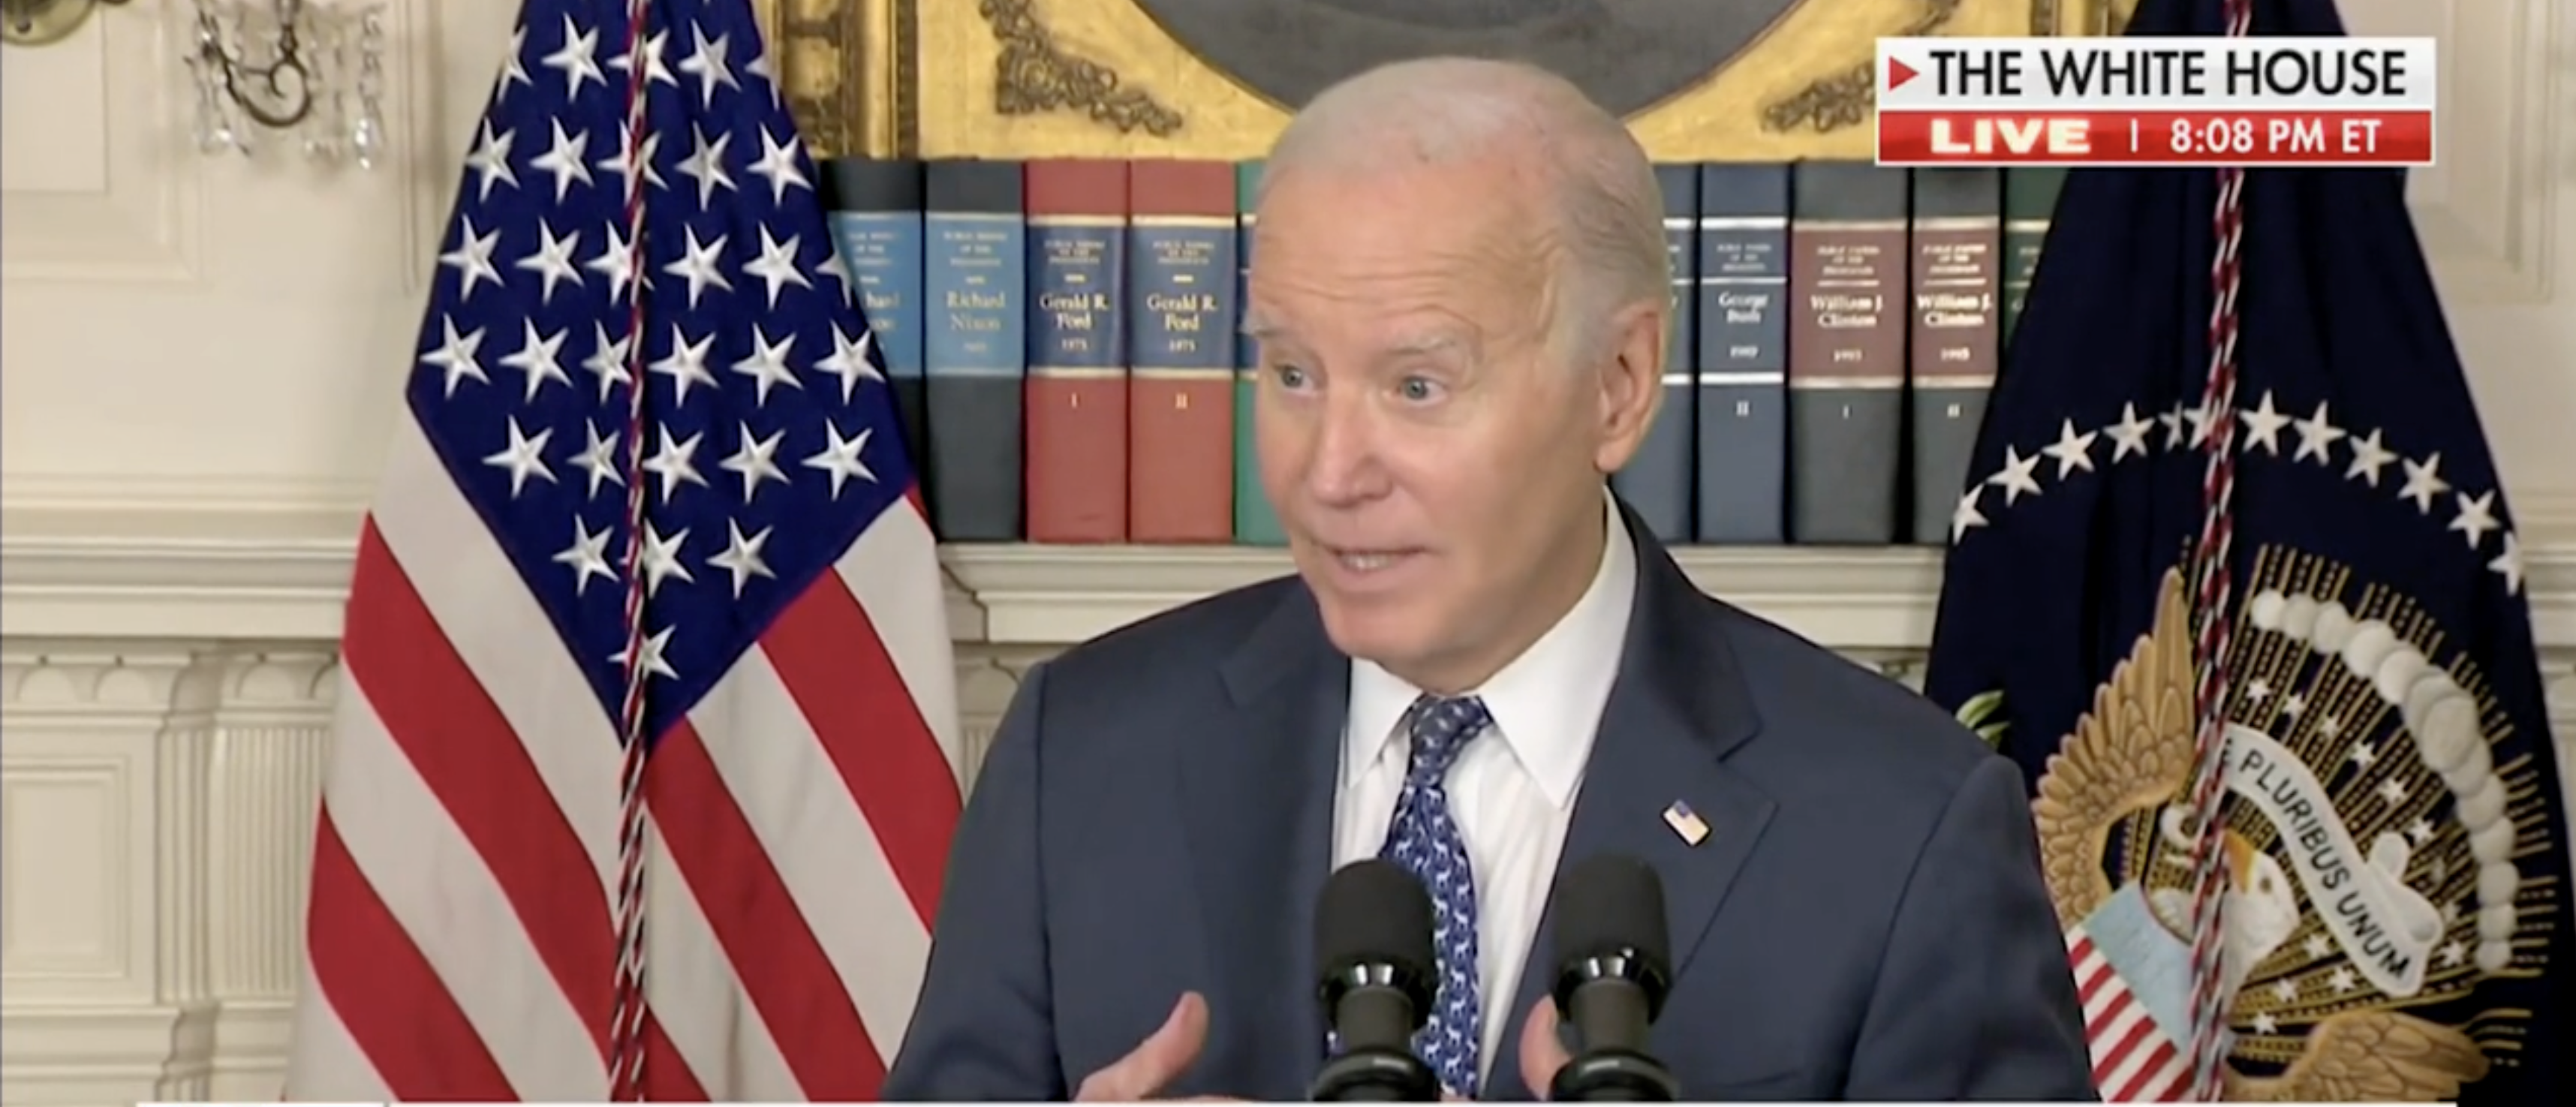 Biden’s Feisty Press Conference Didn’t Quite Line Up With The Report He Sought To Play Down